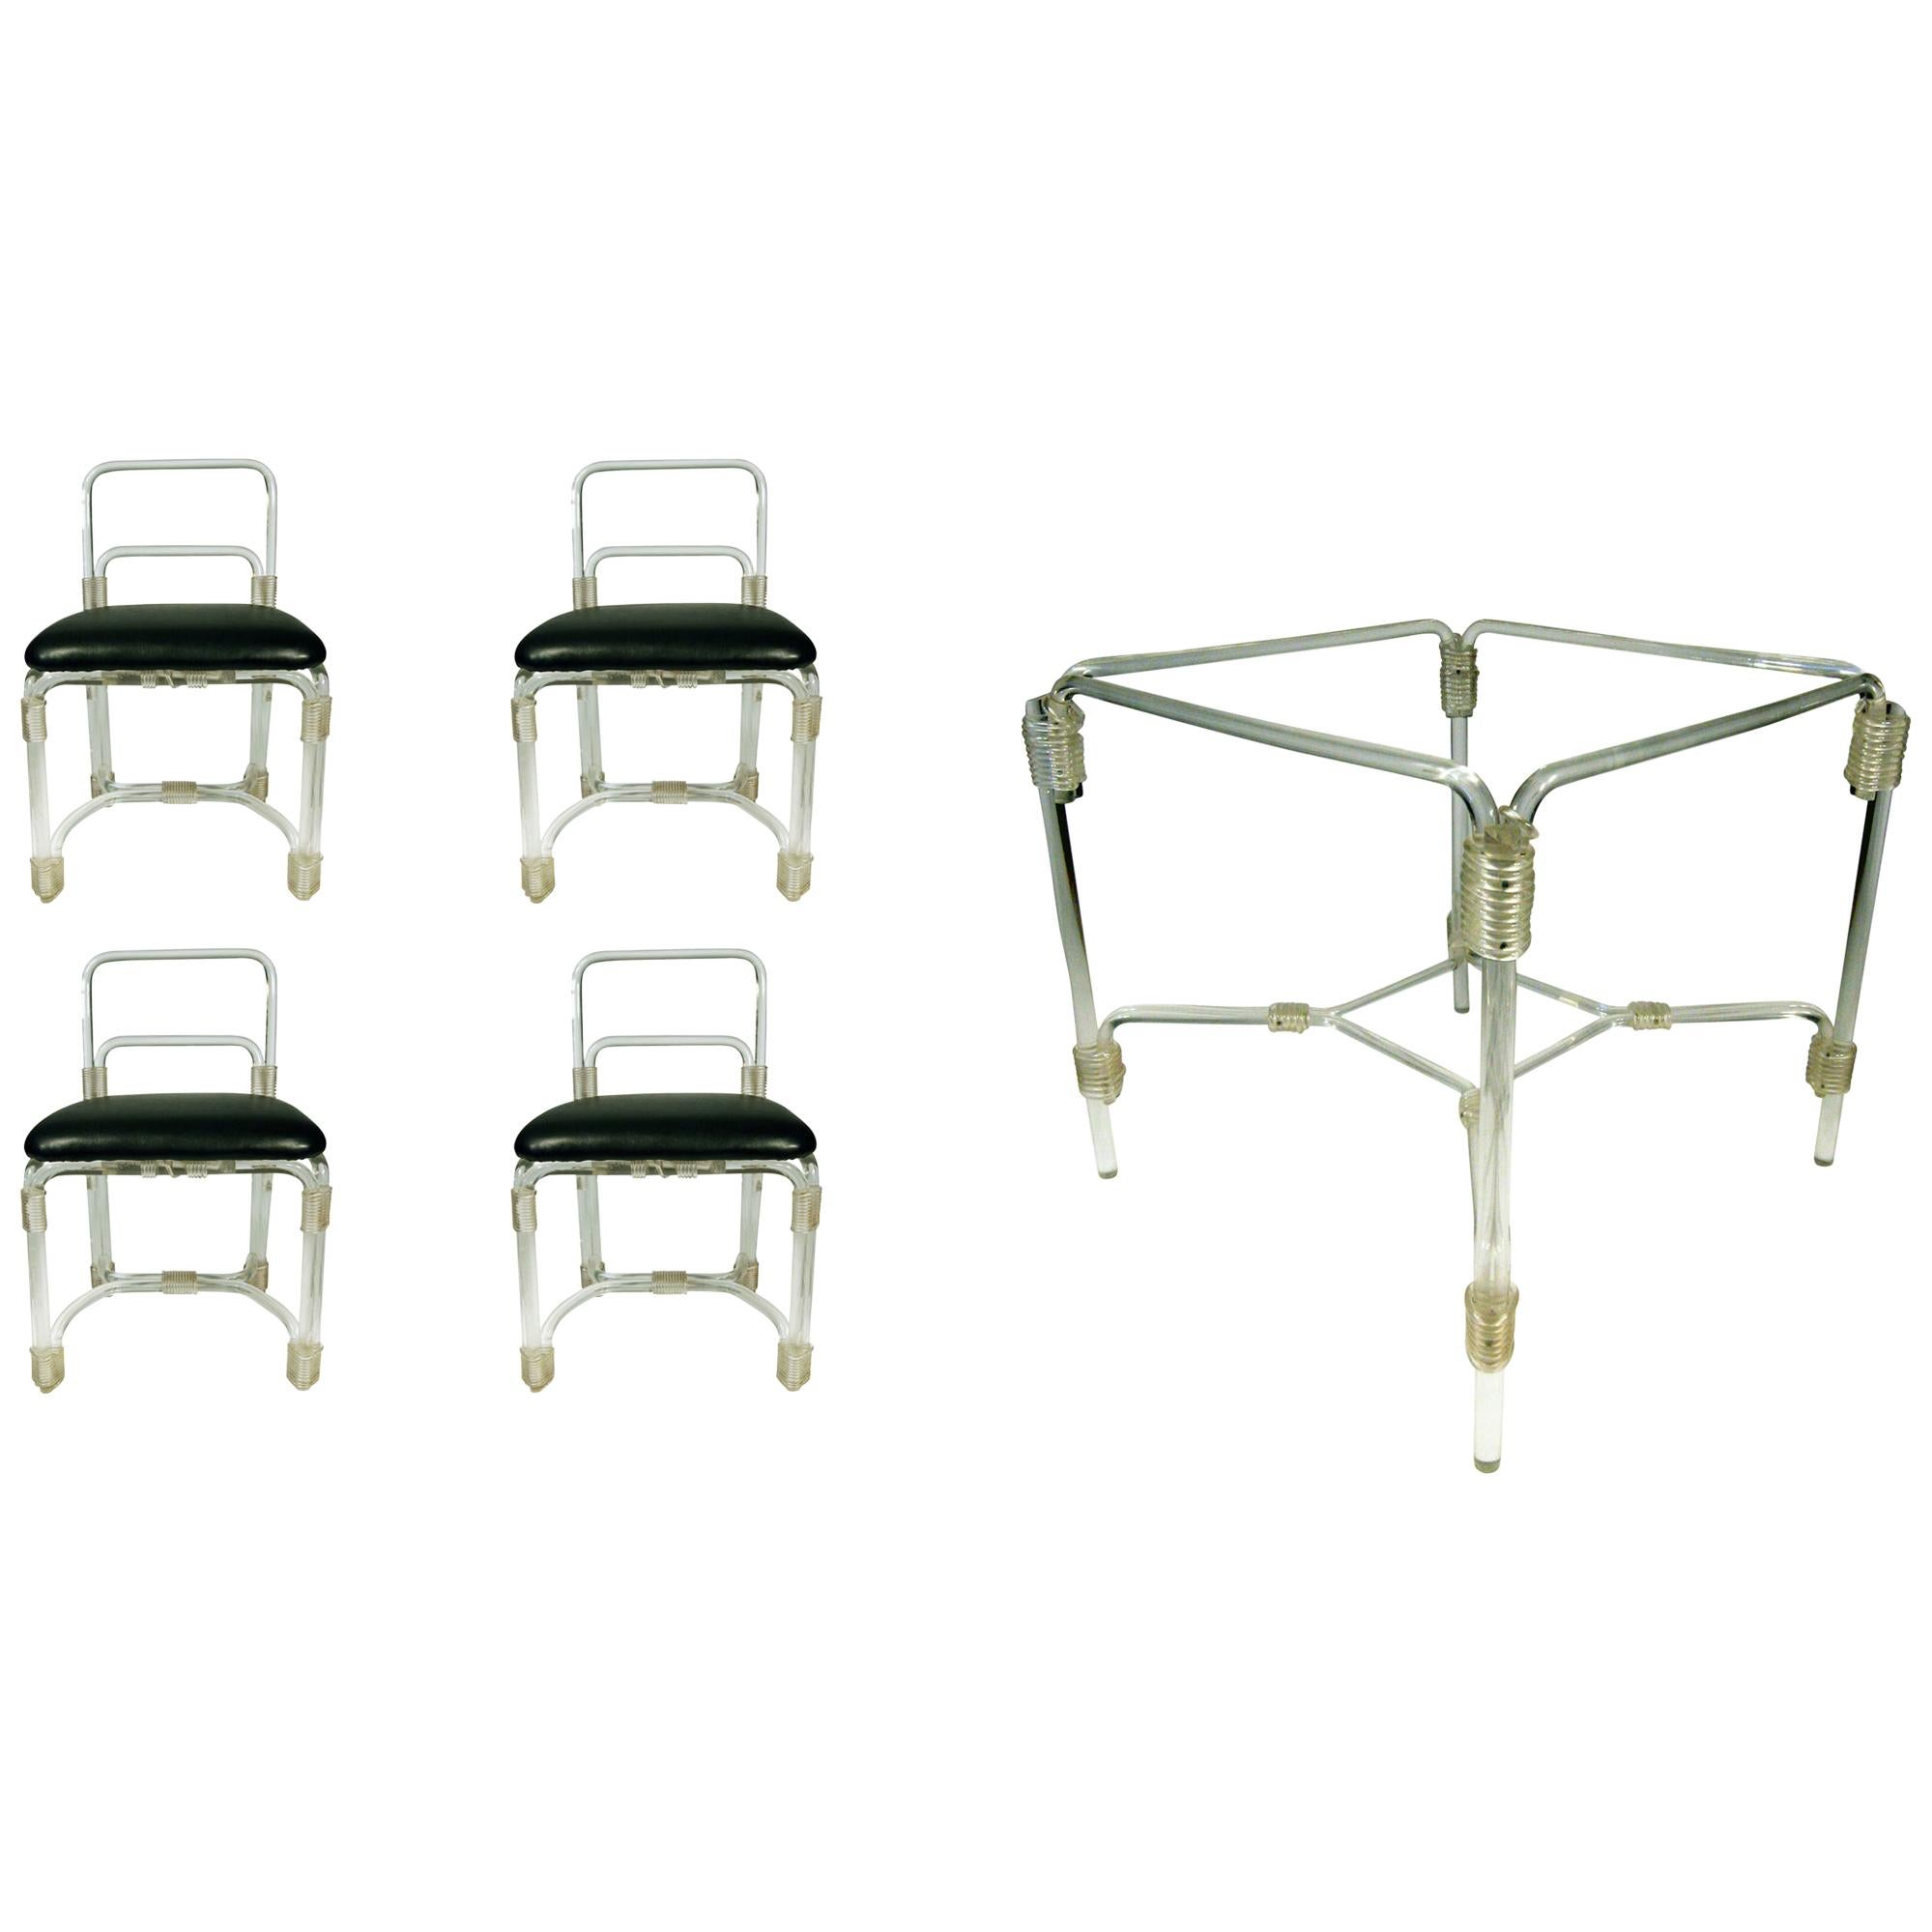 Grosfeld Lucite Dining Table with Four Chairs, circa 1940s